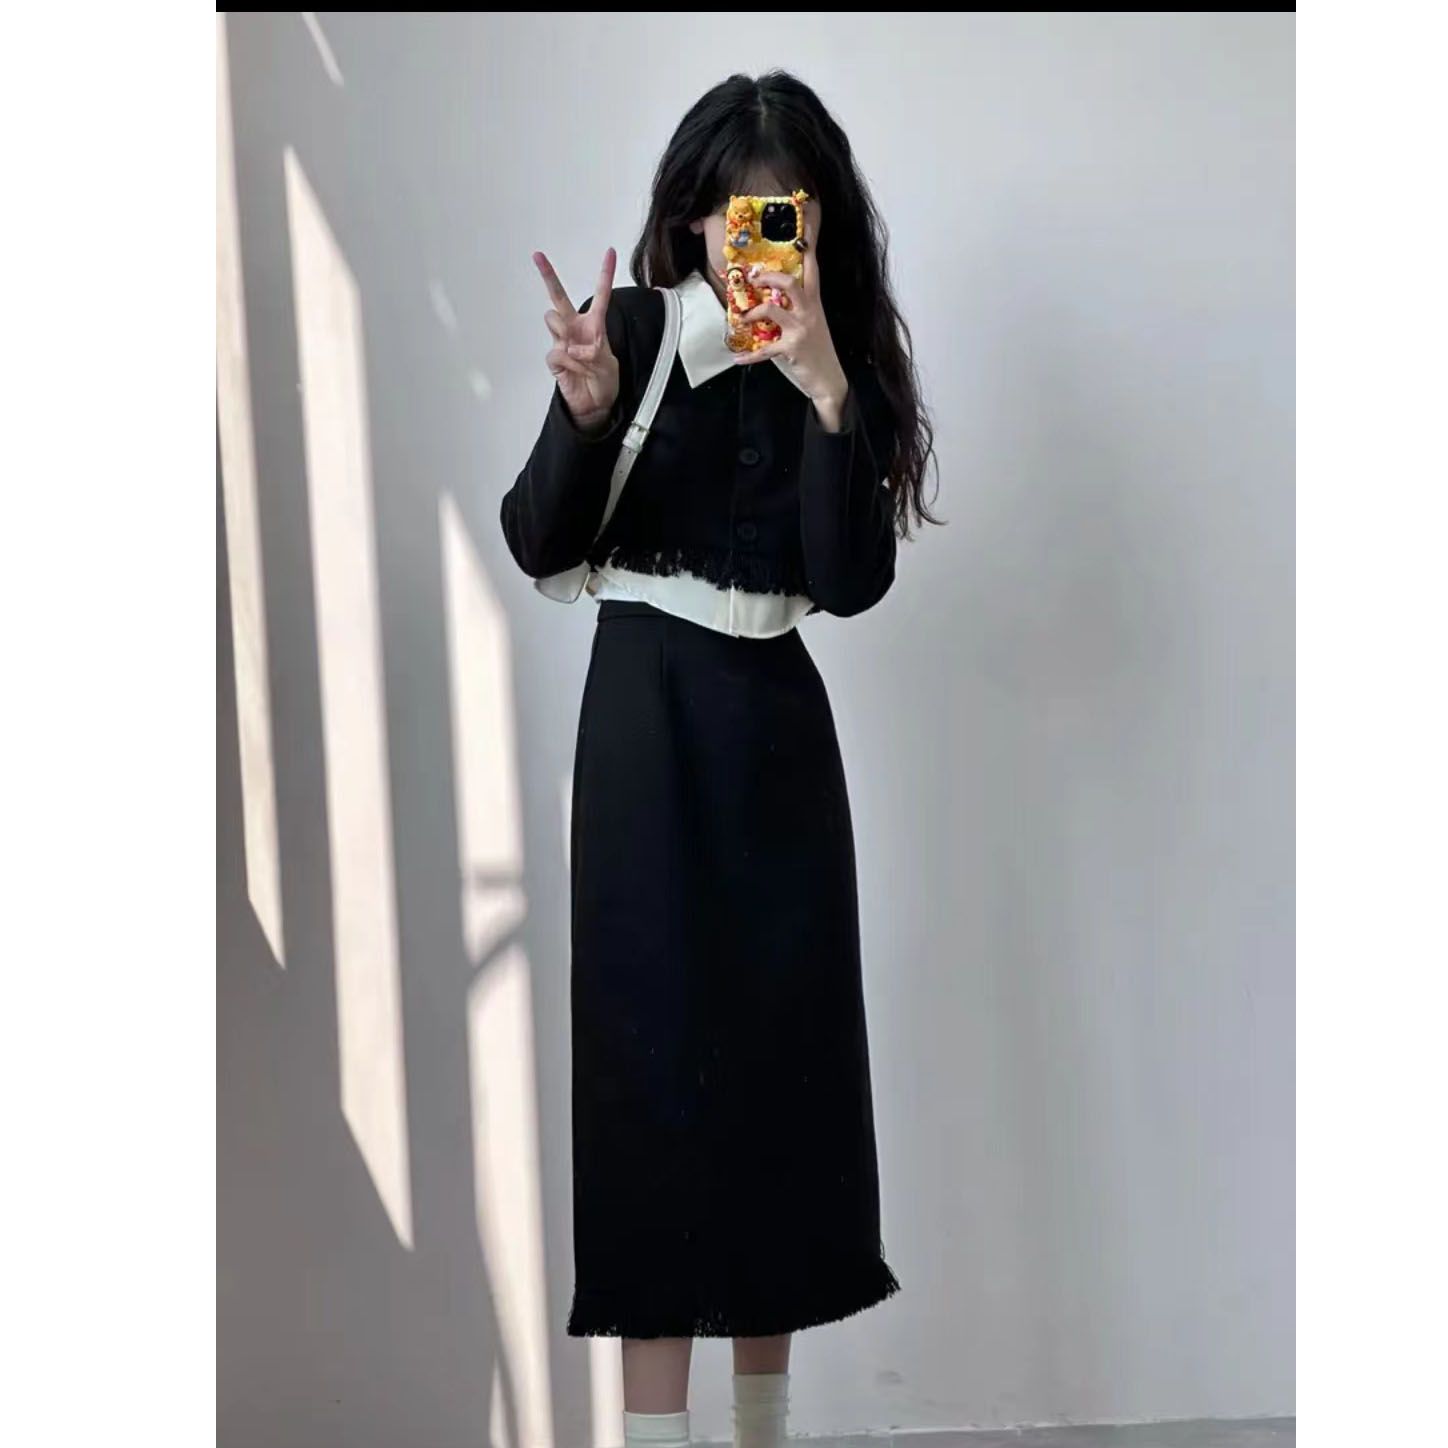 [Oolong Vodka] Retro Black Short Jacket + Skirt Set Women's Autumn and Winter Thickened Two-piece Set